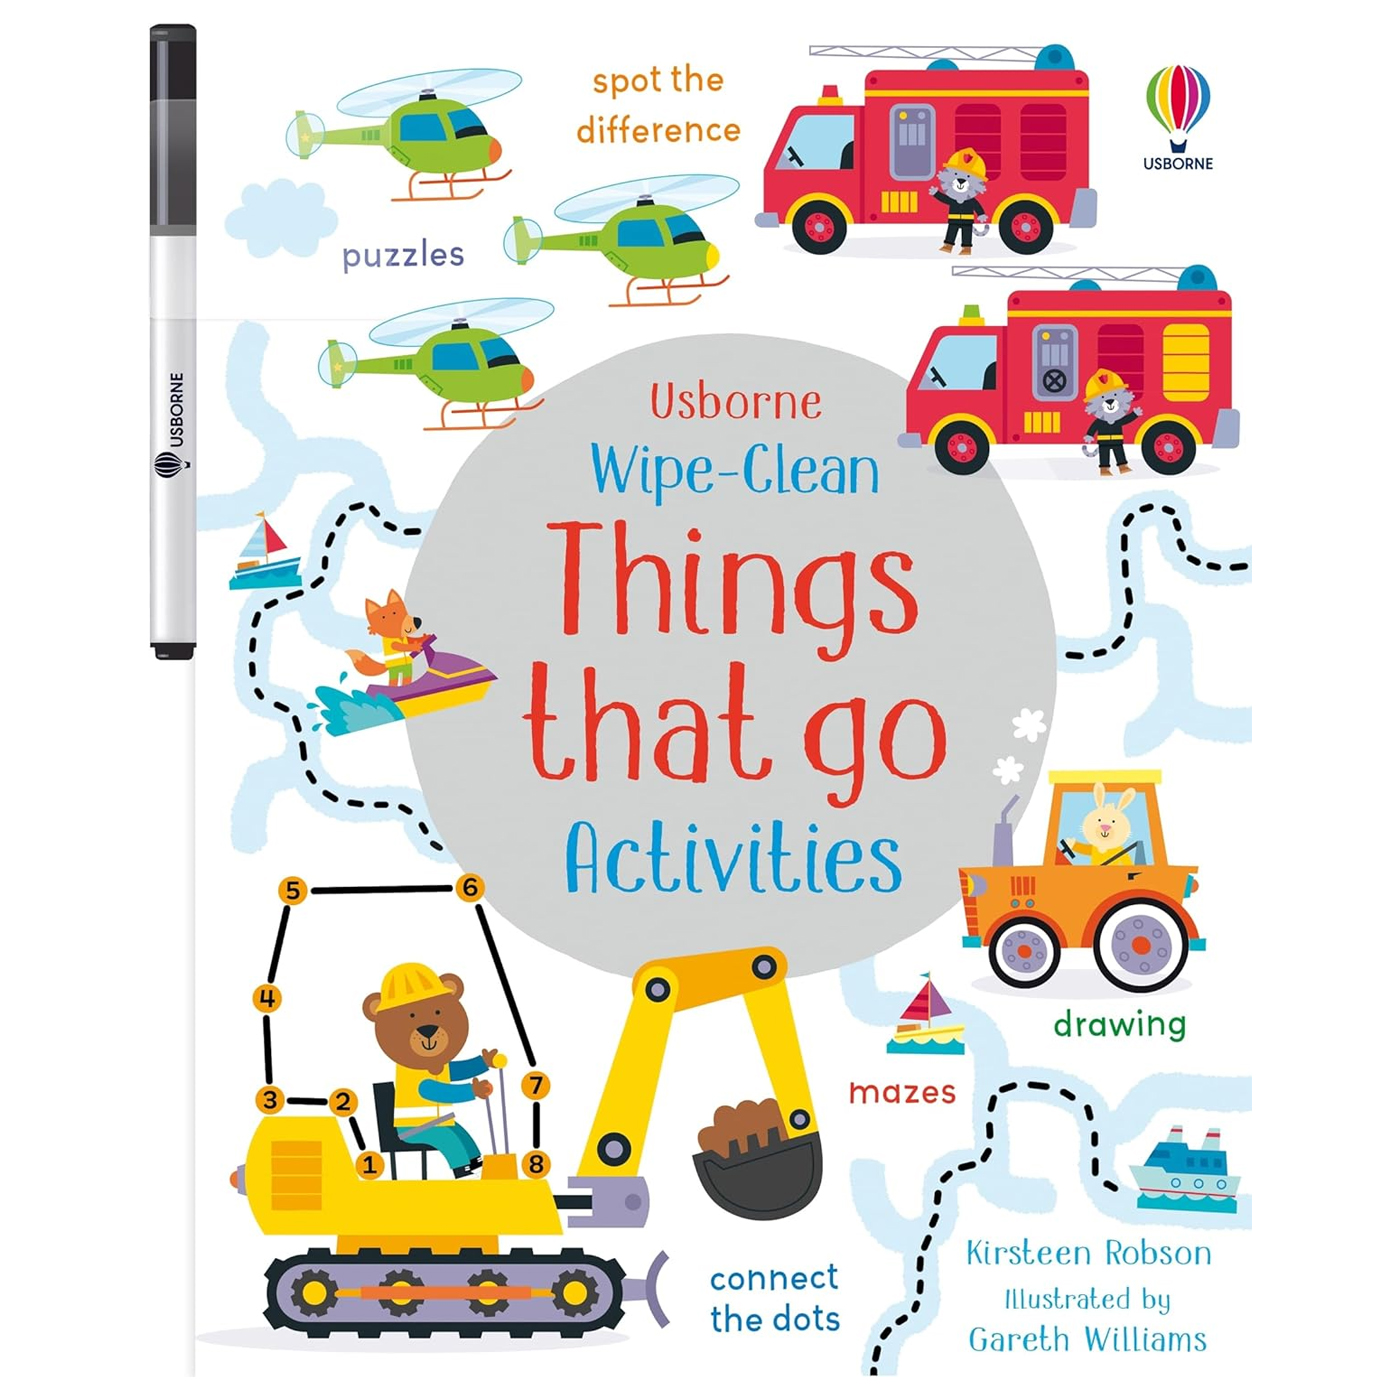 USBORNE Wipe-Clean Things That Go Activities